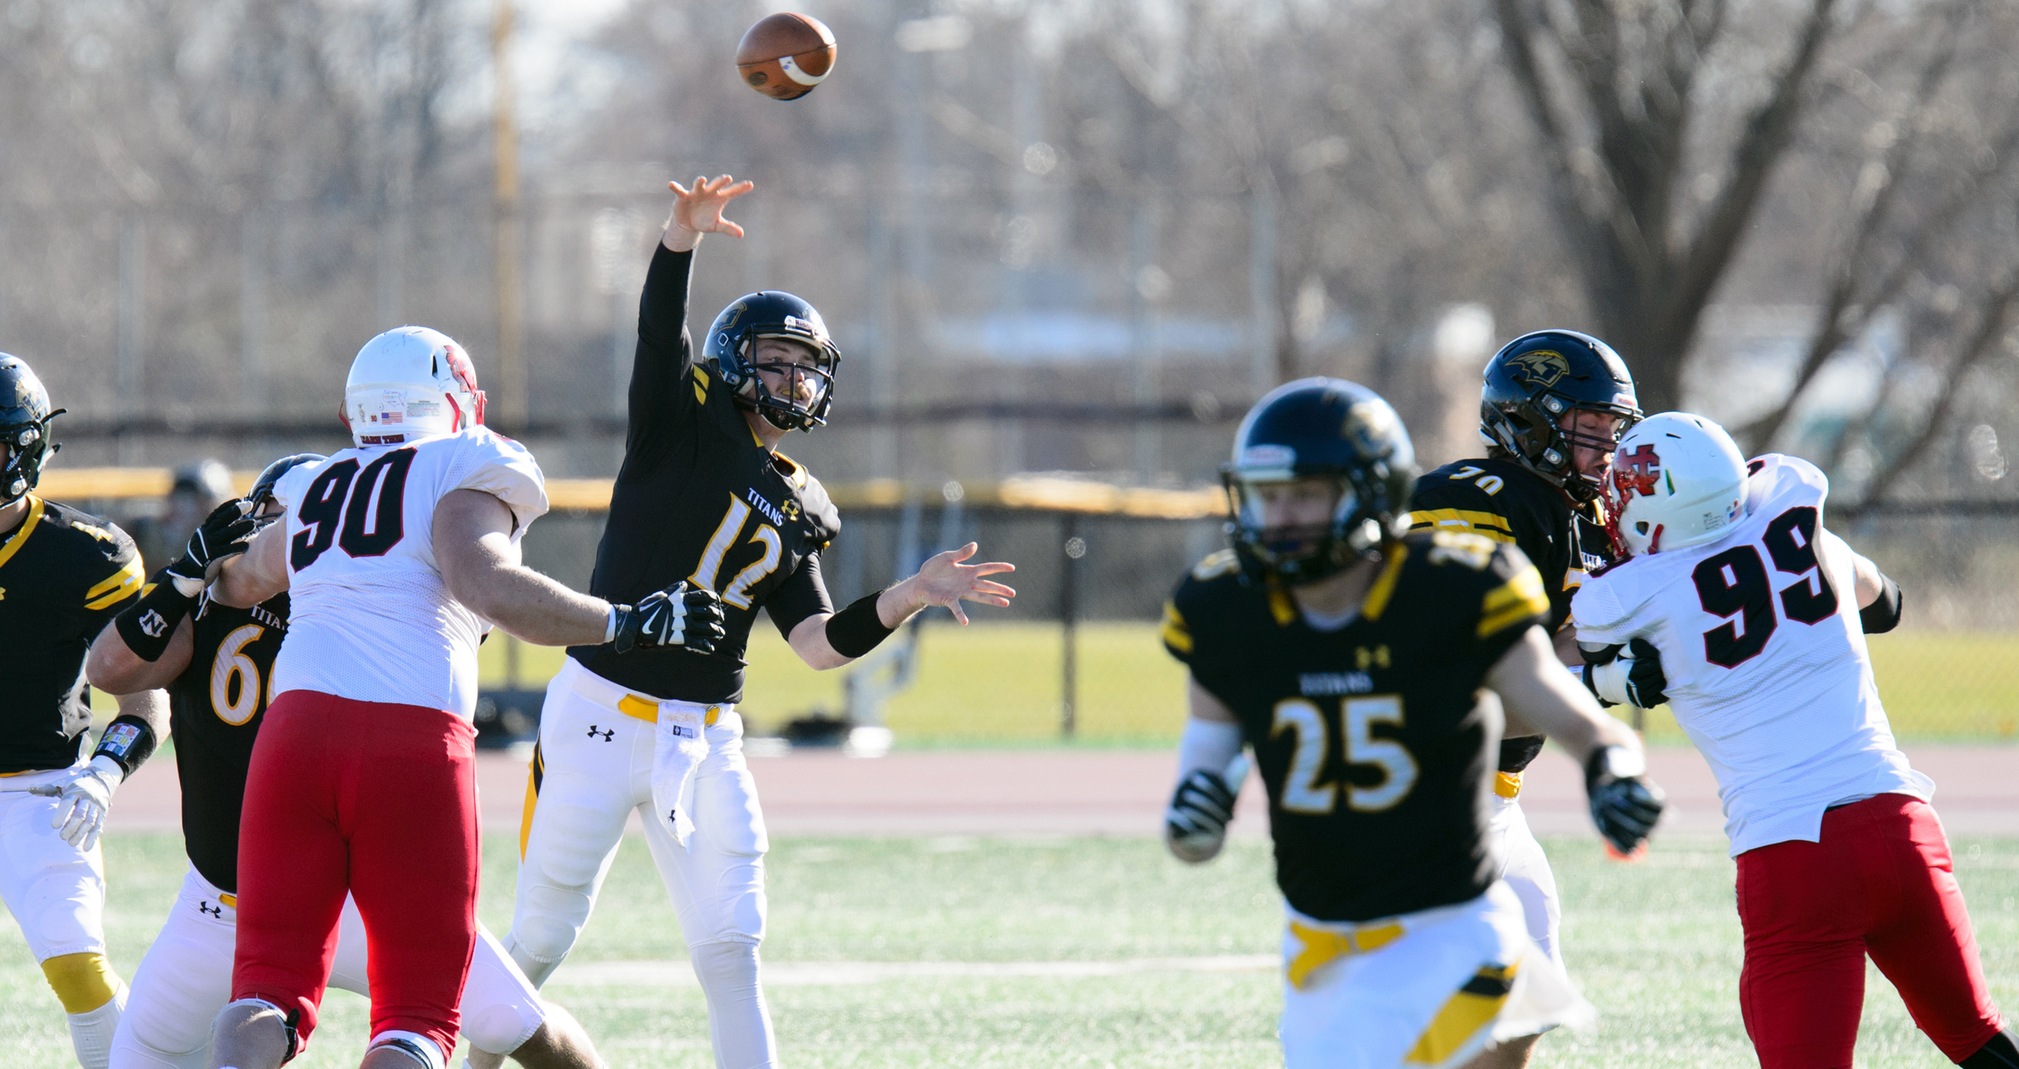 Brett Kasper surpassed a pair of UW-Oshkosh career records against the Cardinals with 9,238 passing yards and 85 touchdown passes.